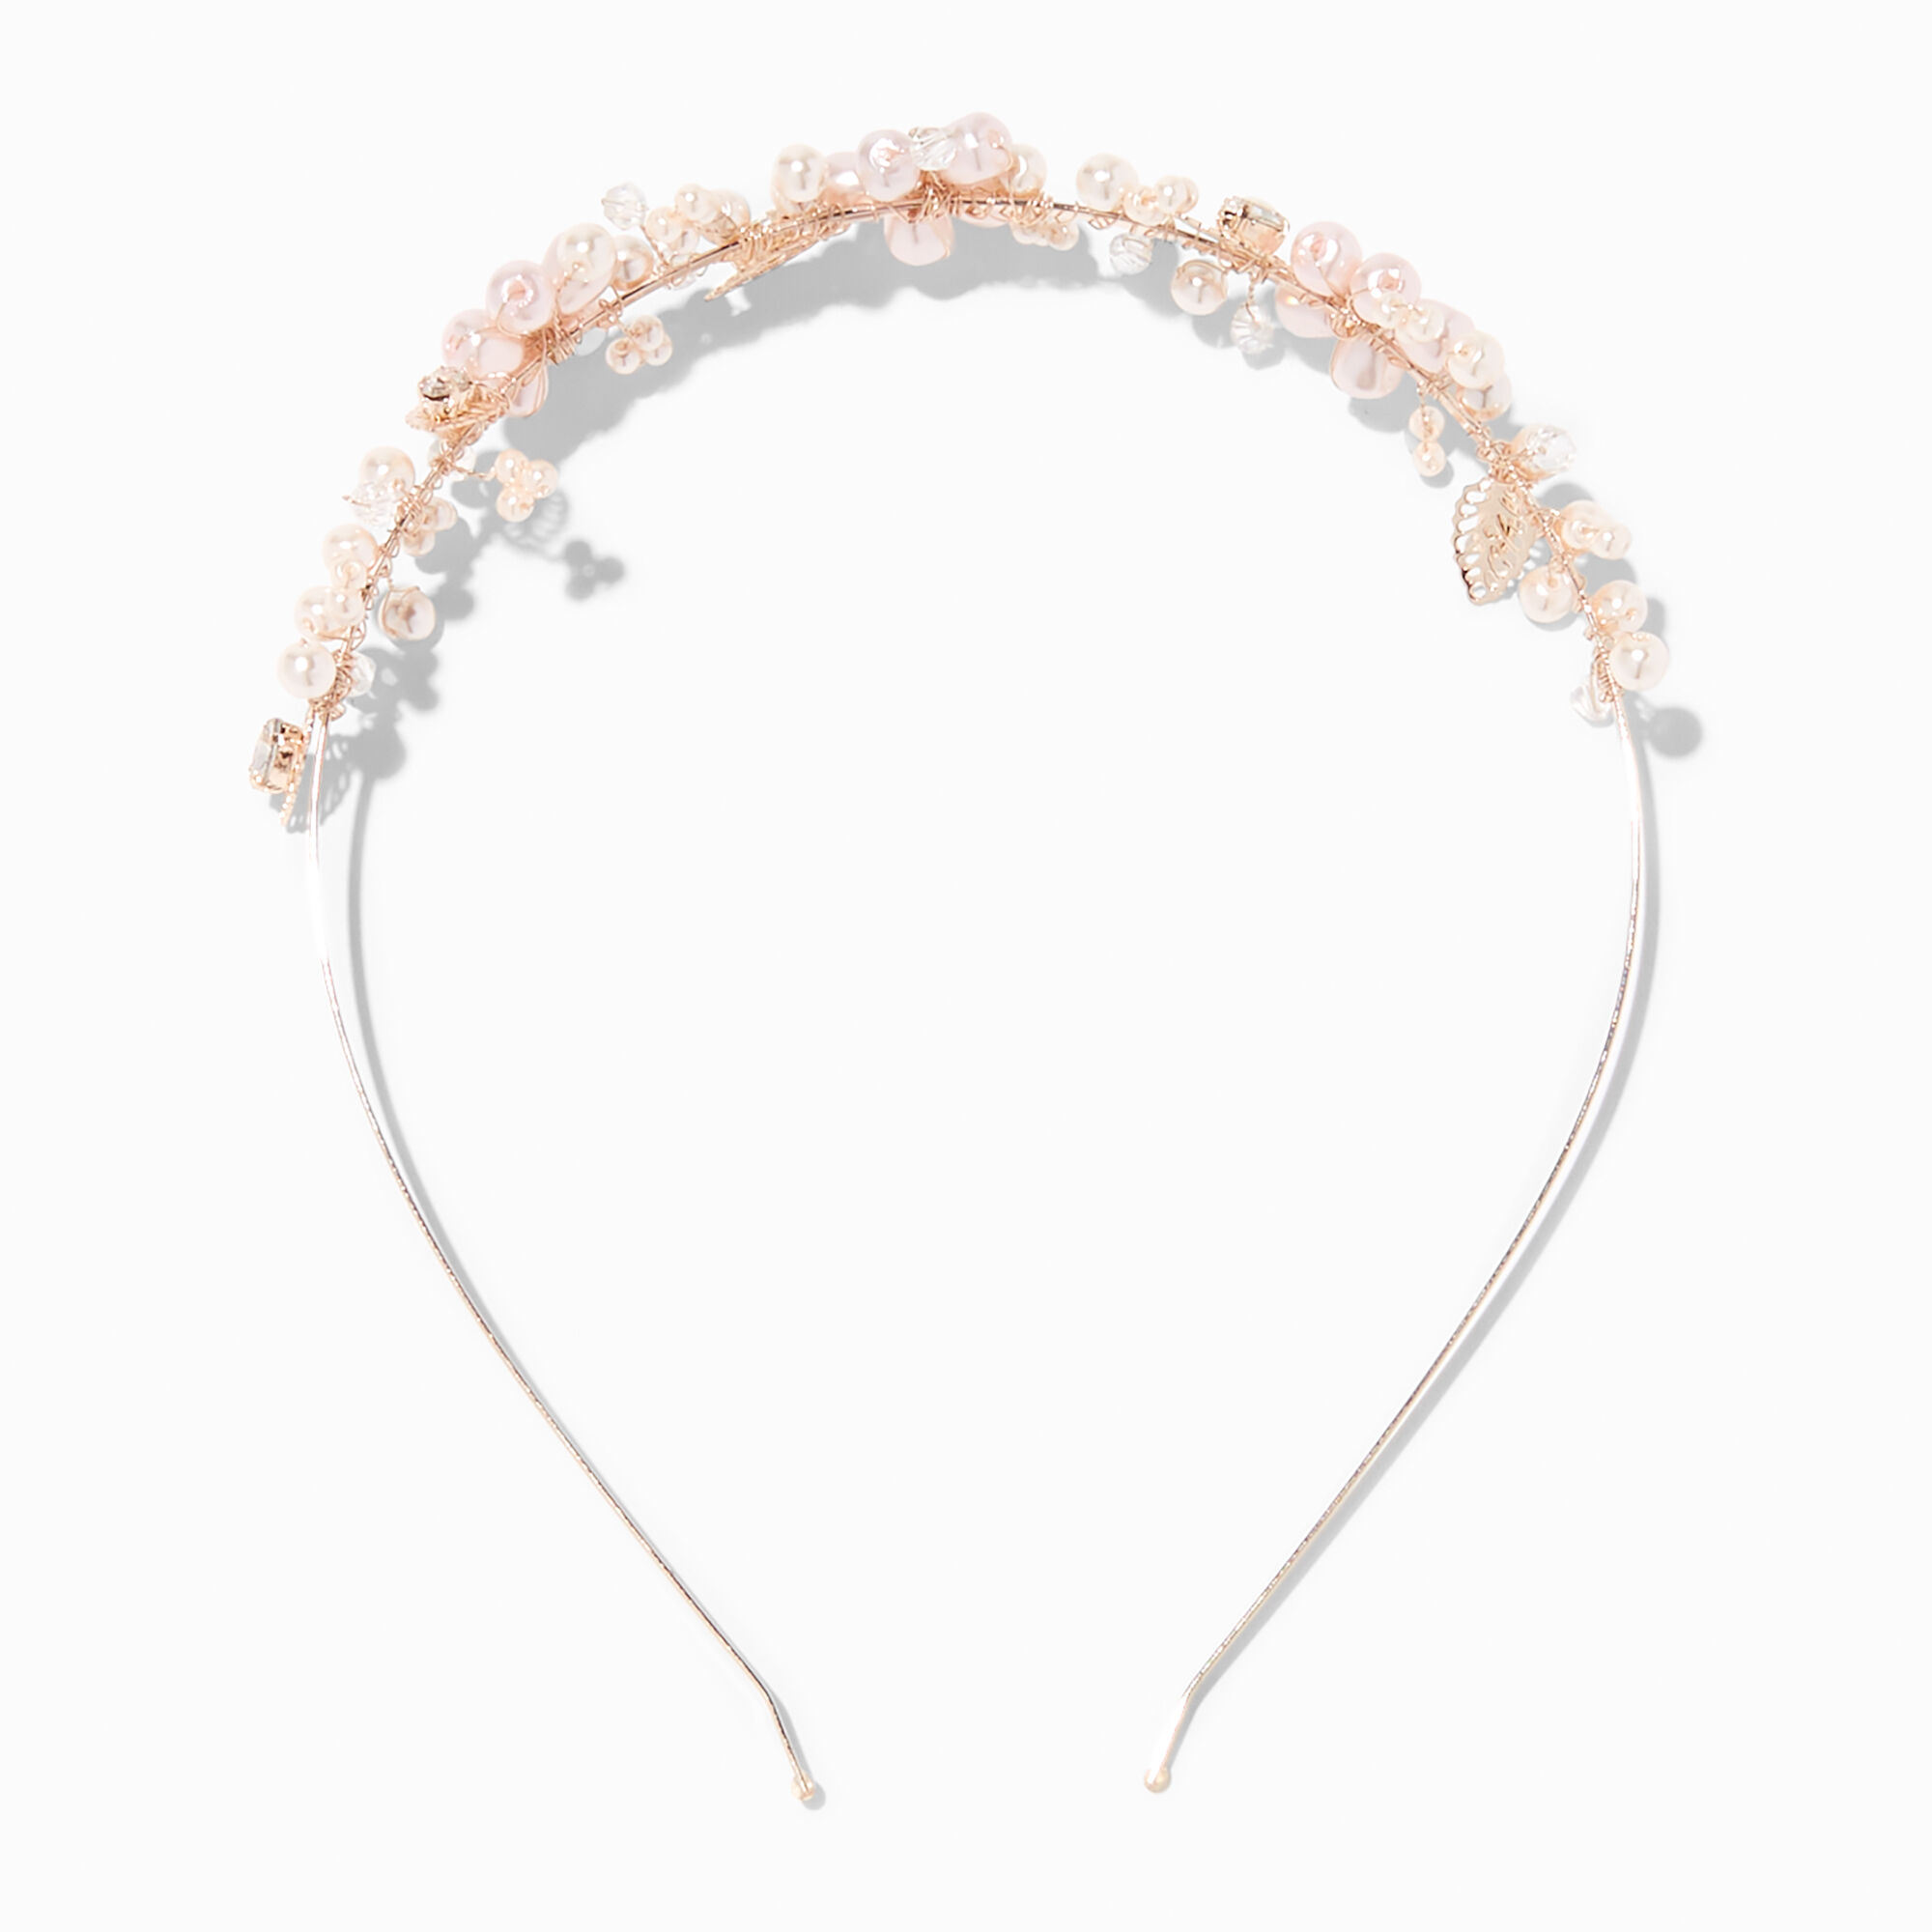 View Claires Rose Crystal Pearl Flower Headband Gold information